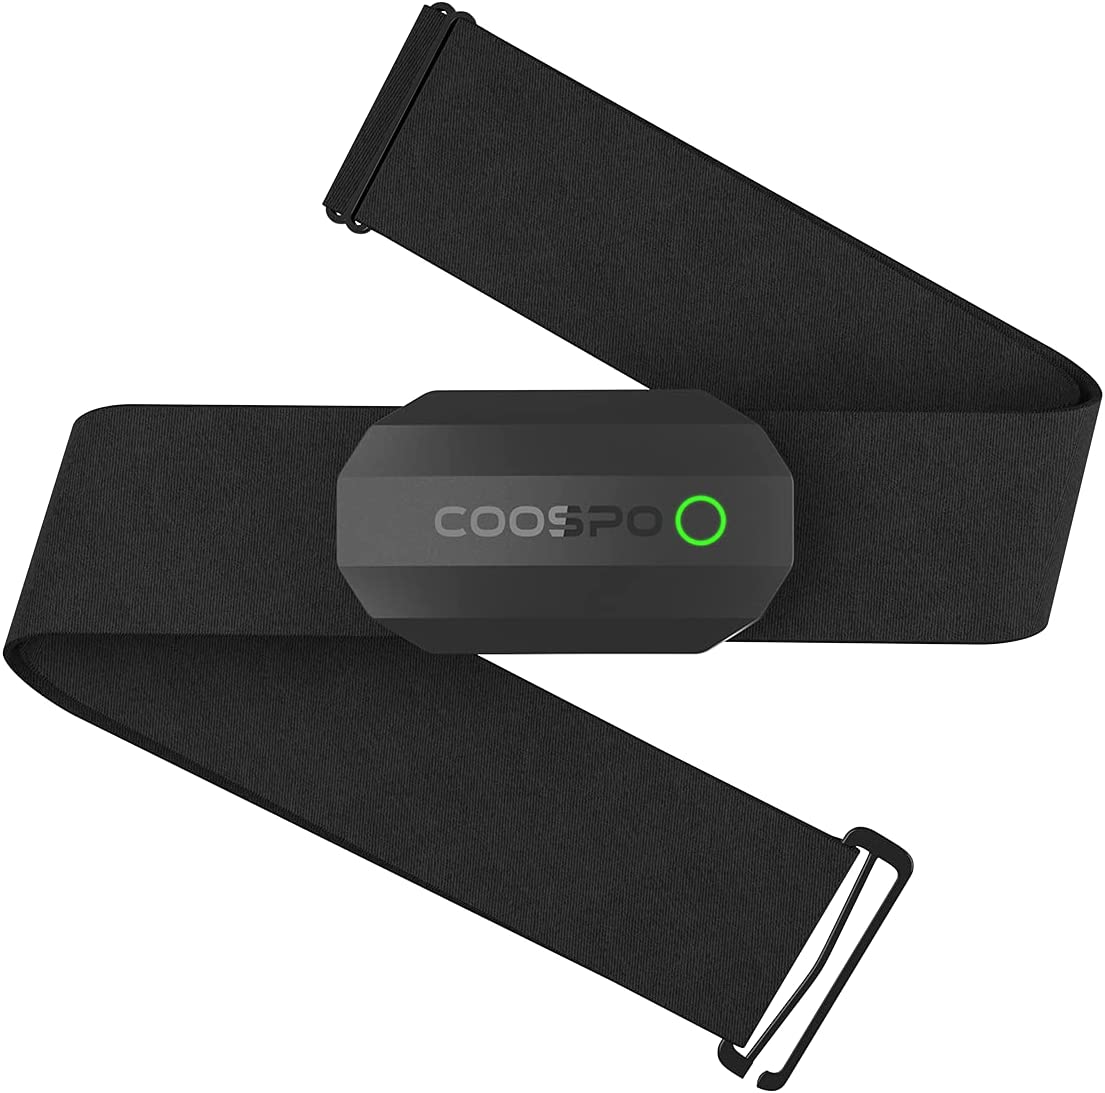 Coospo Heart Rate Monitor, Bluetooth Chest Strap Heart Monitor, Hrm Dual Monitor Sensor Compatible With Ip67, Peloton,Zwift,Ddp Yoga,Strava,Wahoo Fitness,Polar Beat For Ios Android | Wholesale | Tradeling